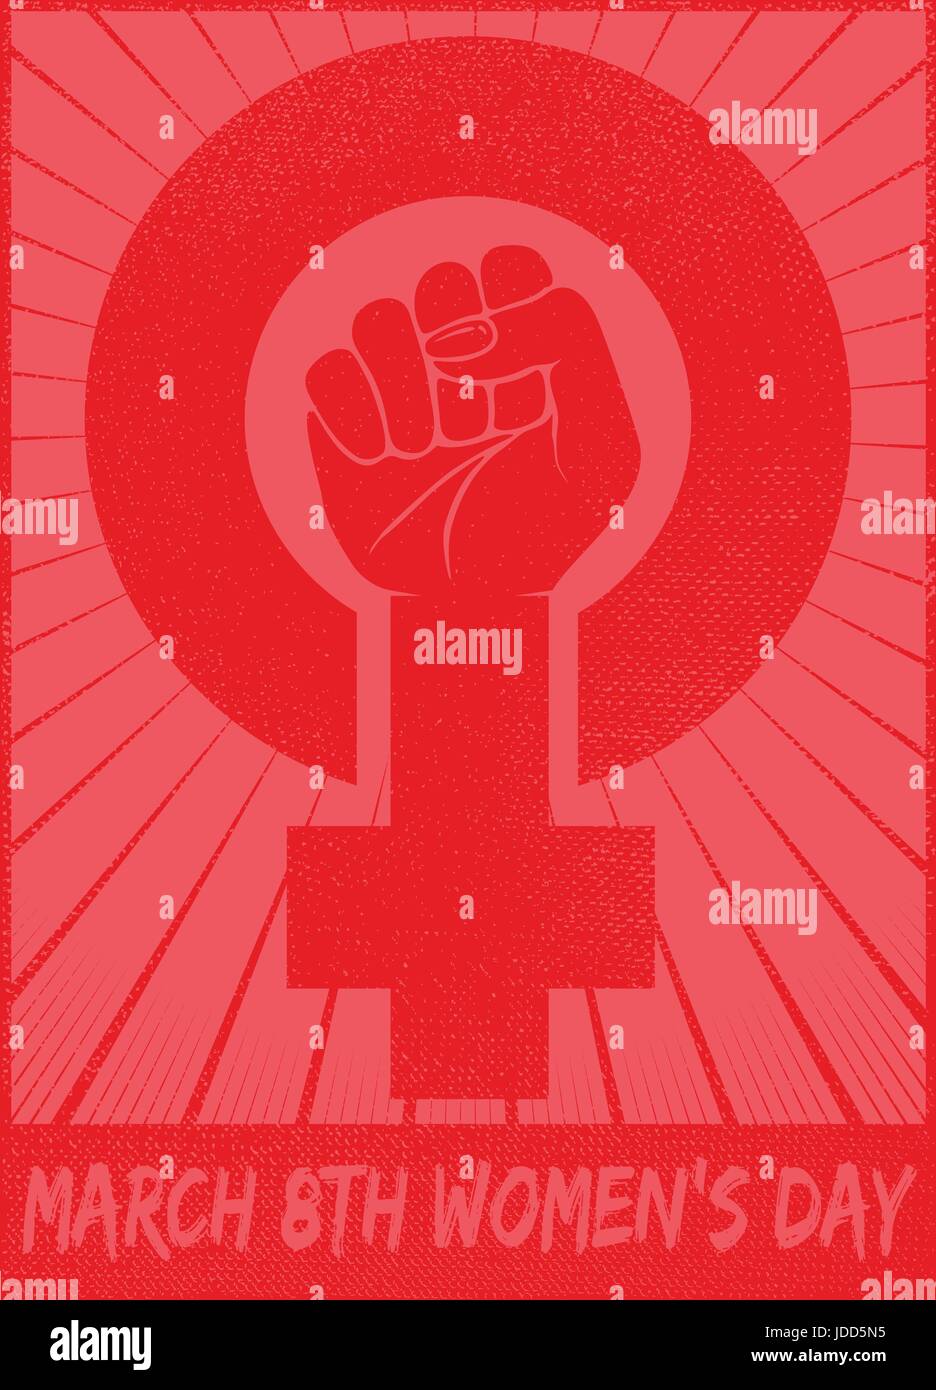 March 8th women's day celebration with female gender symbol and raised fist feminist protest vector card or logo design illustration Stock Vector